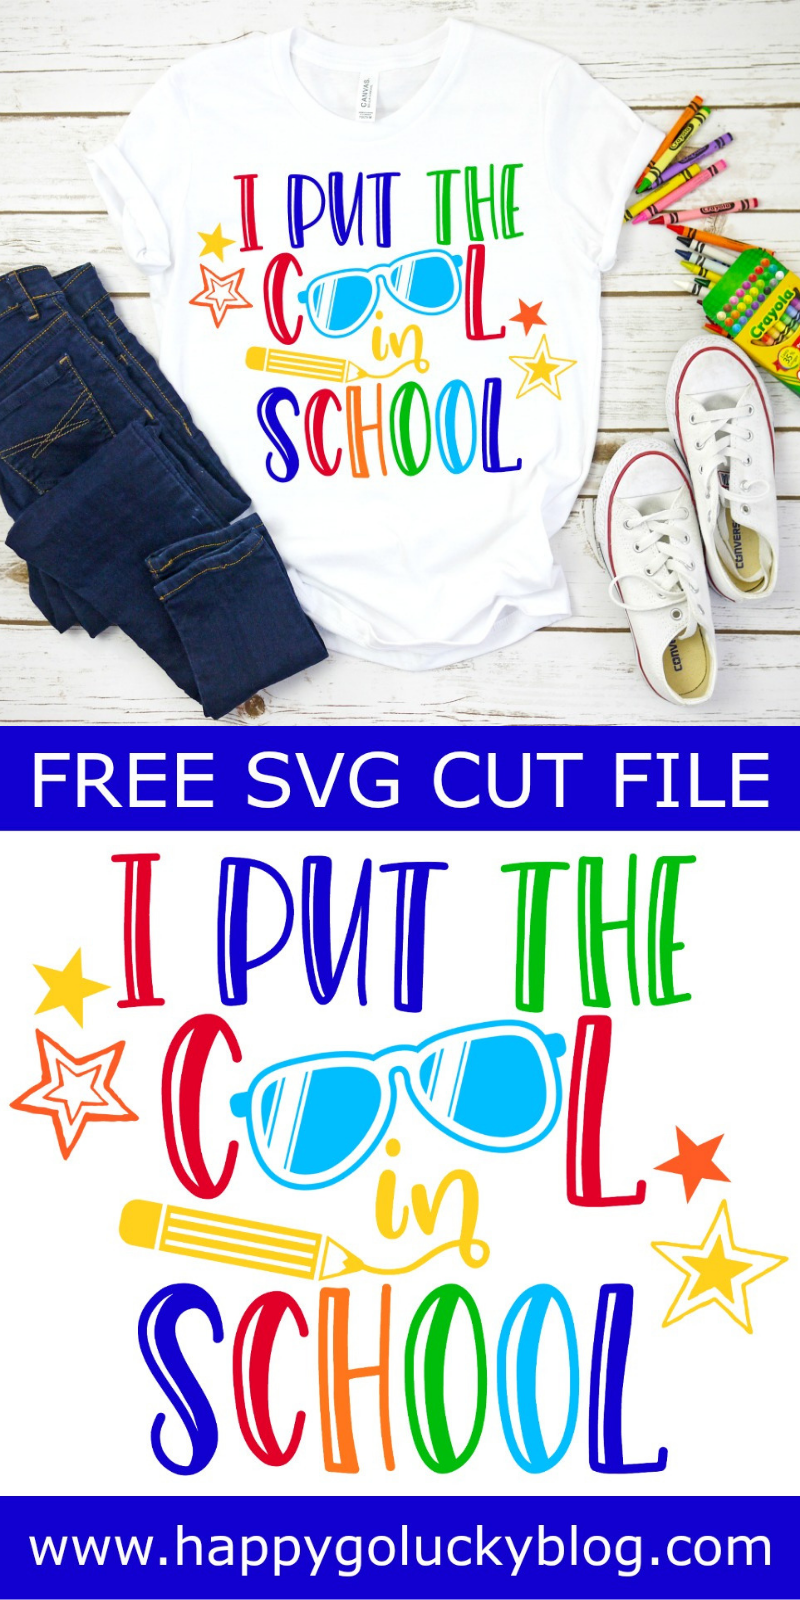 https://www.happygoluckyblog.com/wp-content/uploads/2019/08/Cut-Files-I-Put-the-Cool-in-School.png